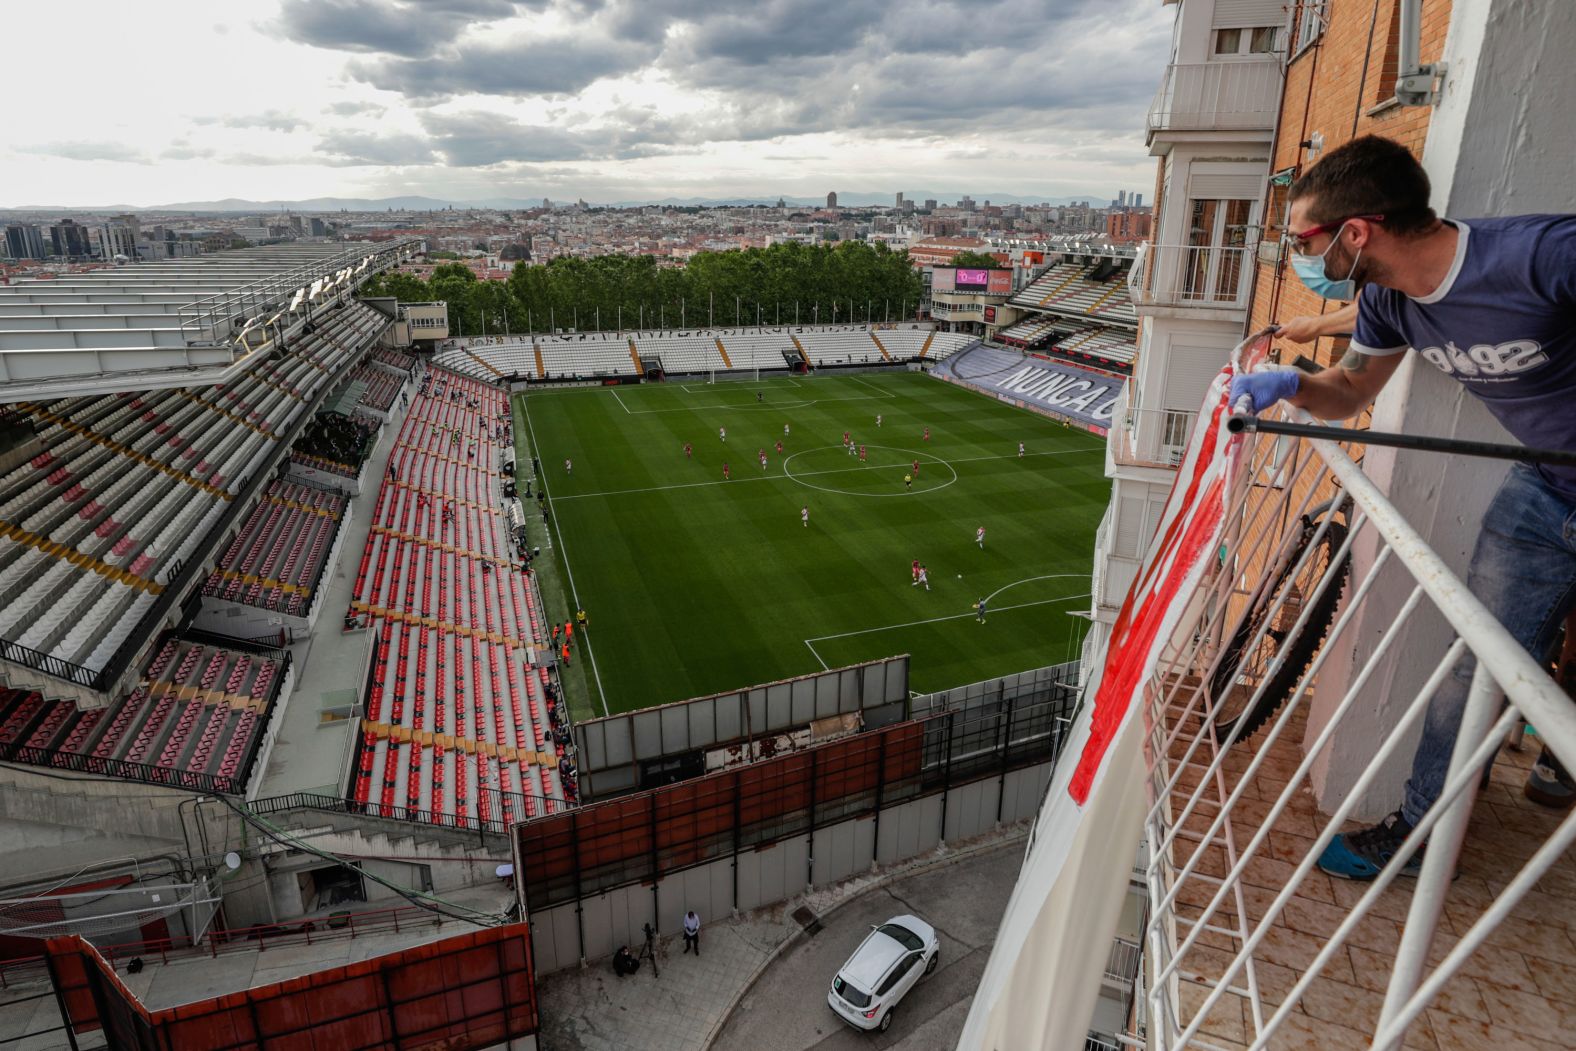 A soccer fan in Madrid watches a professional match between Rayo Vallecano and Albacete on June 10. Spanish leagues resumed more than three months after play was suspended because of the pandemic.